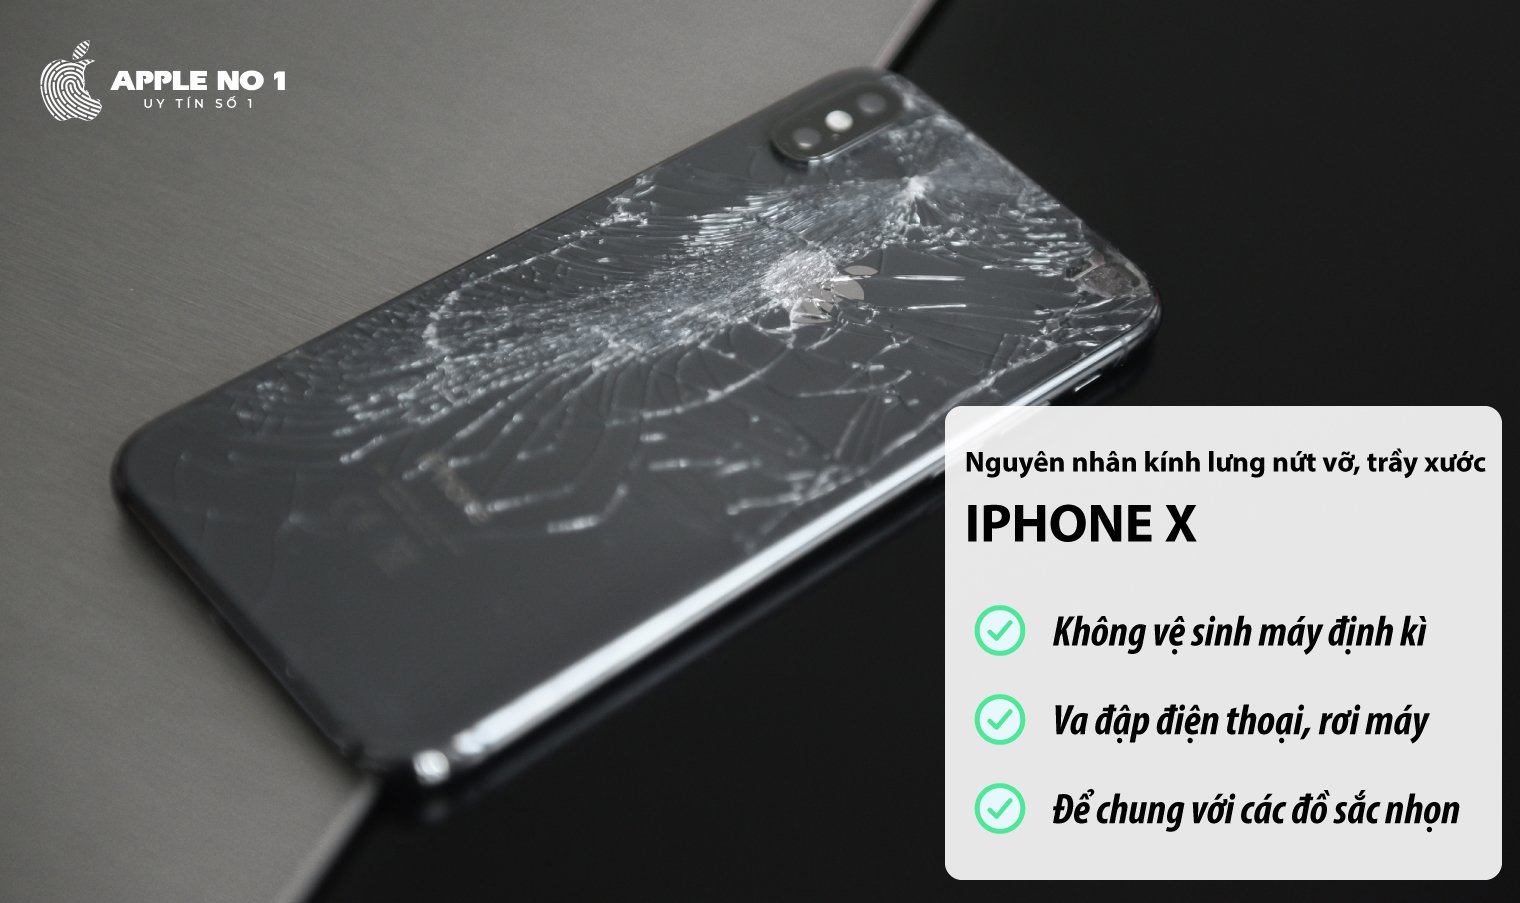 nguyen nhan kinh lung iphone x bi nut vo can thay the